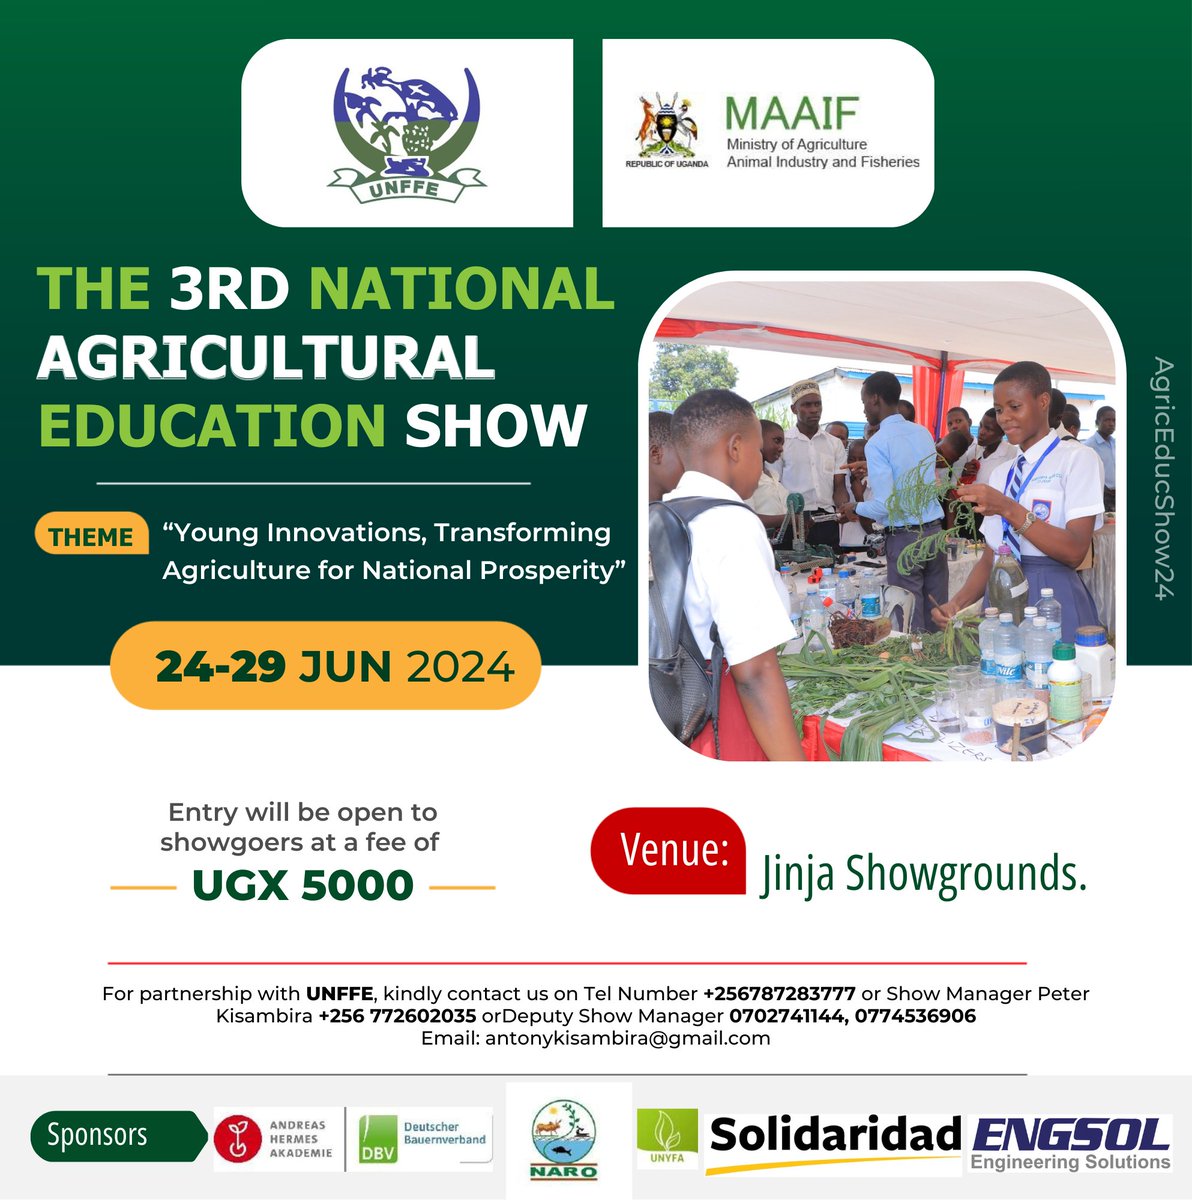 The #AgricEducShow24 is a Comprehensive Exhibition on Agriculture, Farm Machinery, Dairy & Dairy Technology, Grain & Seeds, Rice & Rice Technology, Poultry & Livestock, Food Farm equipment & Technologies.